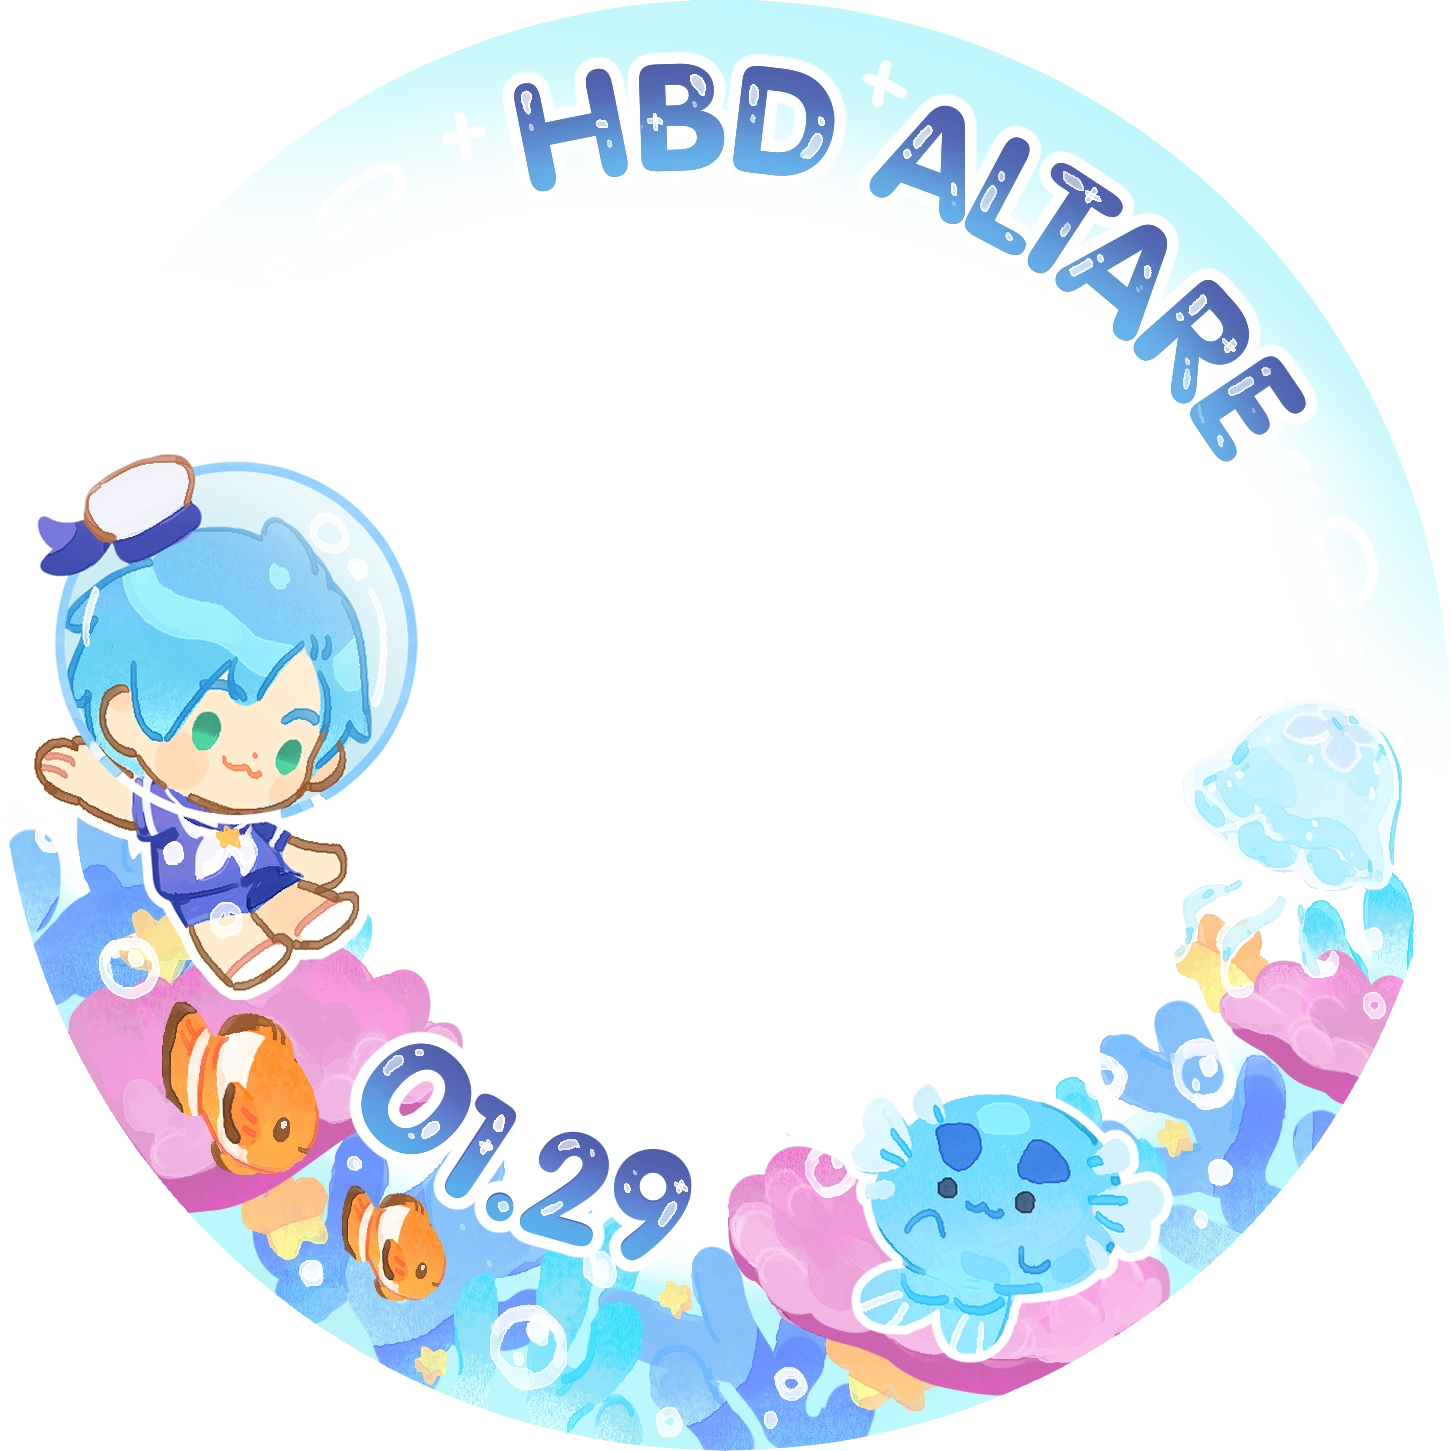 A chibi Altare dressed as a sailor waves while donning a bubble helmet and floating atop a colorful reef with clownfishes and a moon jellyfish. A Cultare slime is also depicted as a mermaid. Text reads, "HBD Altare 01.29" in a circular frame.